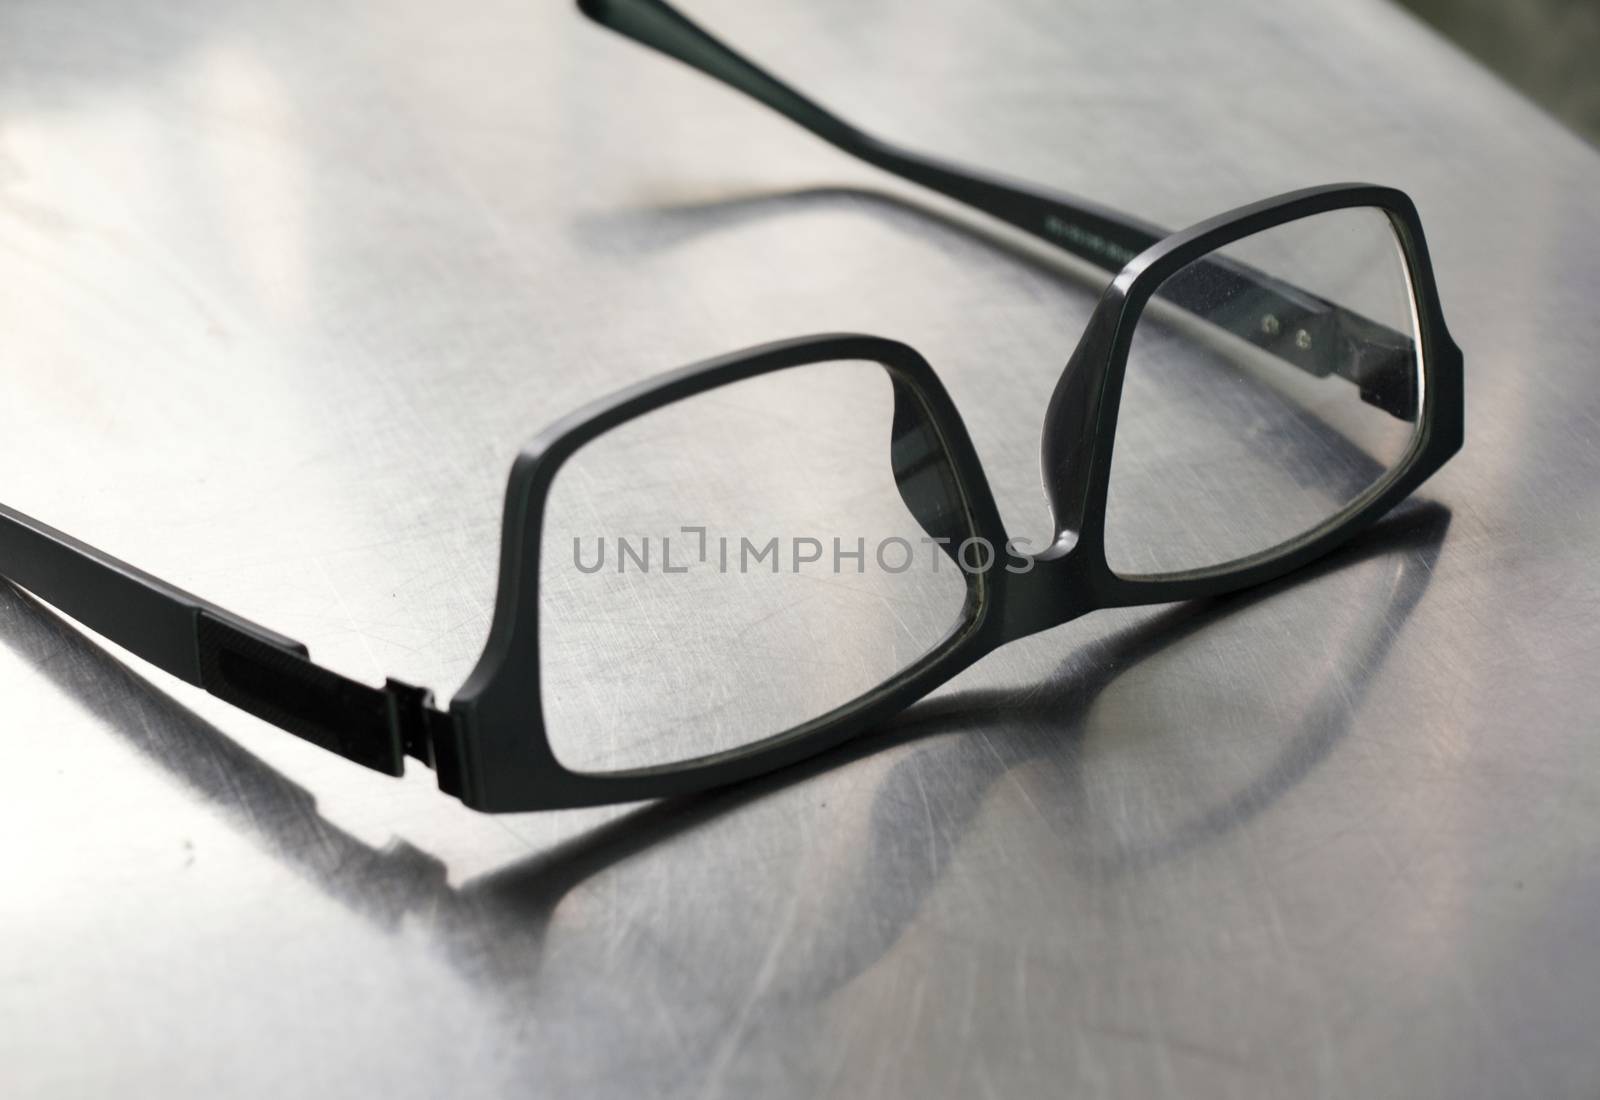 COLOR PHOTO OF PLASTIC FRAME GLASSES ON STEEL TABLE